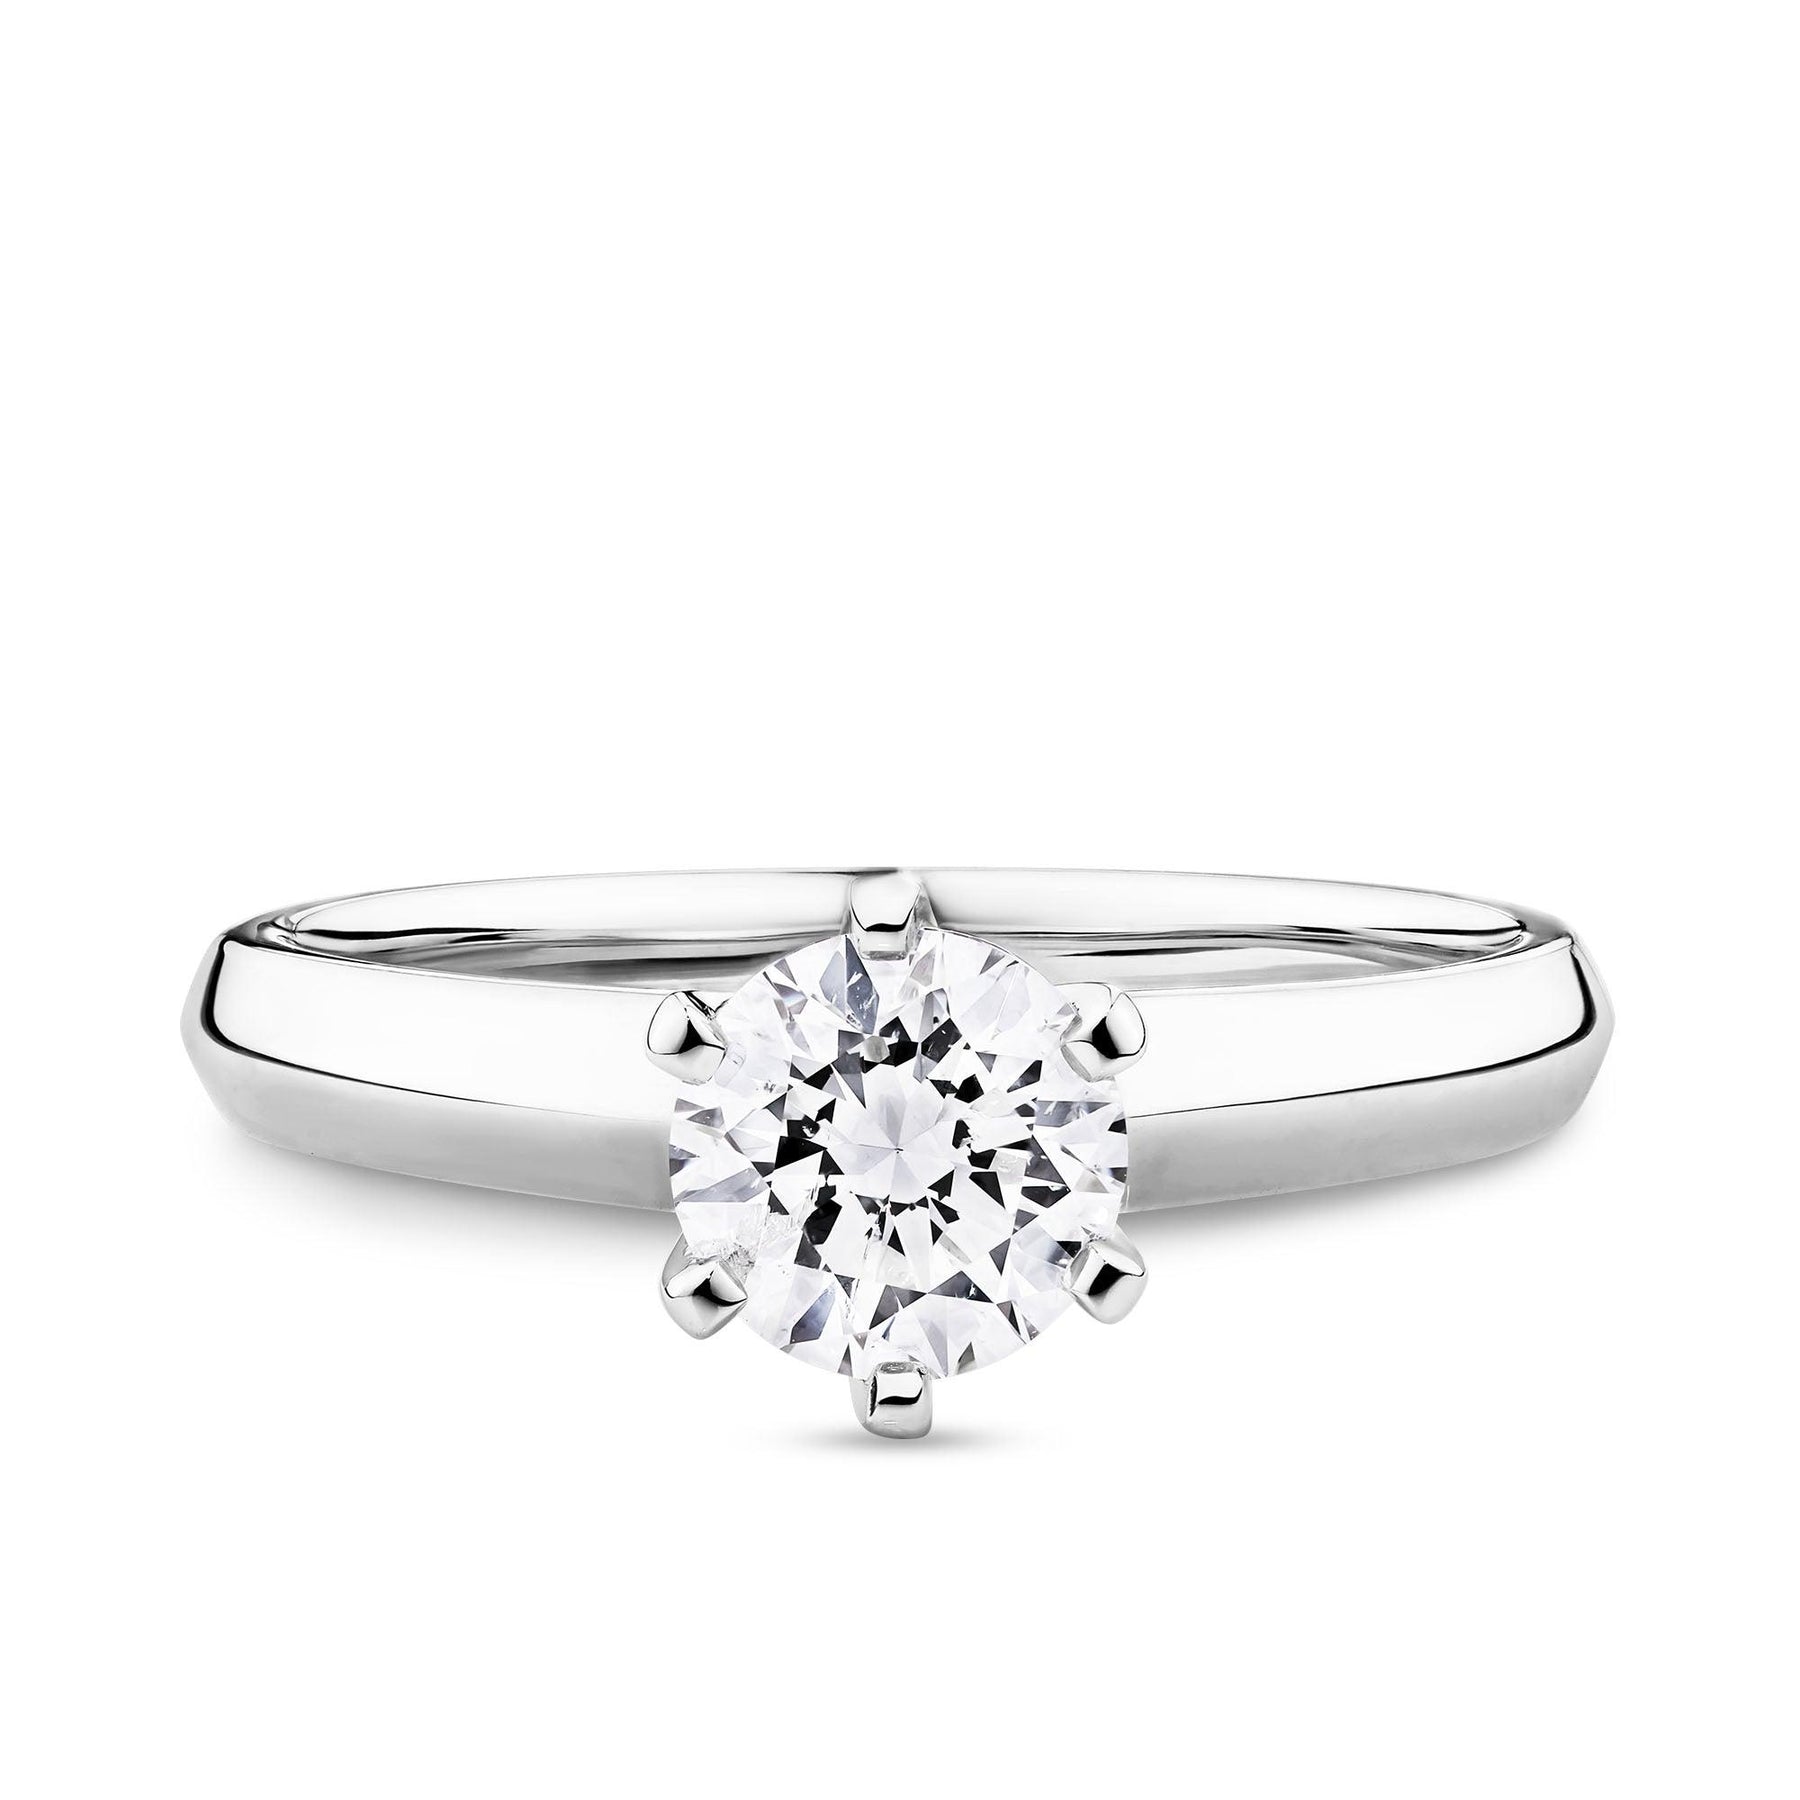 1ct TDW Diamond Solitaire Engagement Ring in 18ct White Gold - Wallace Bishop